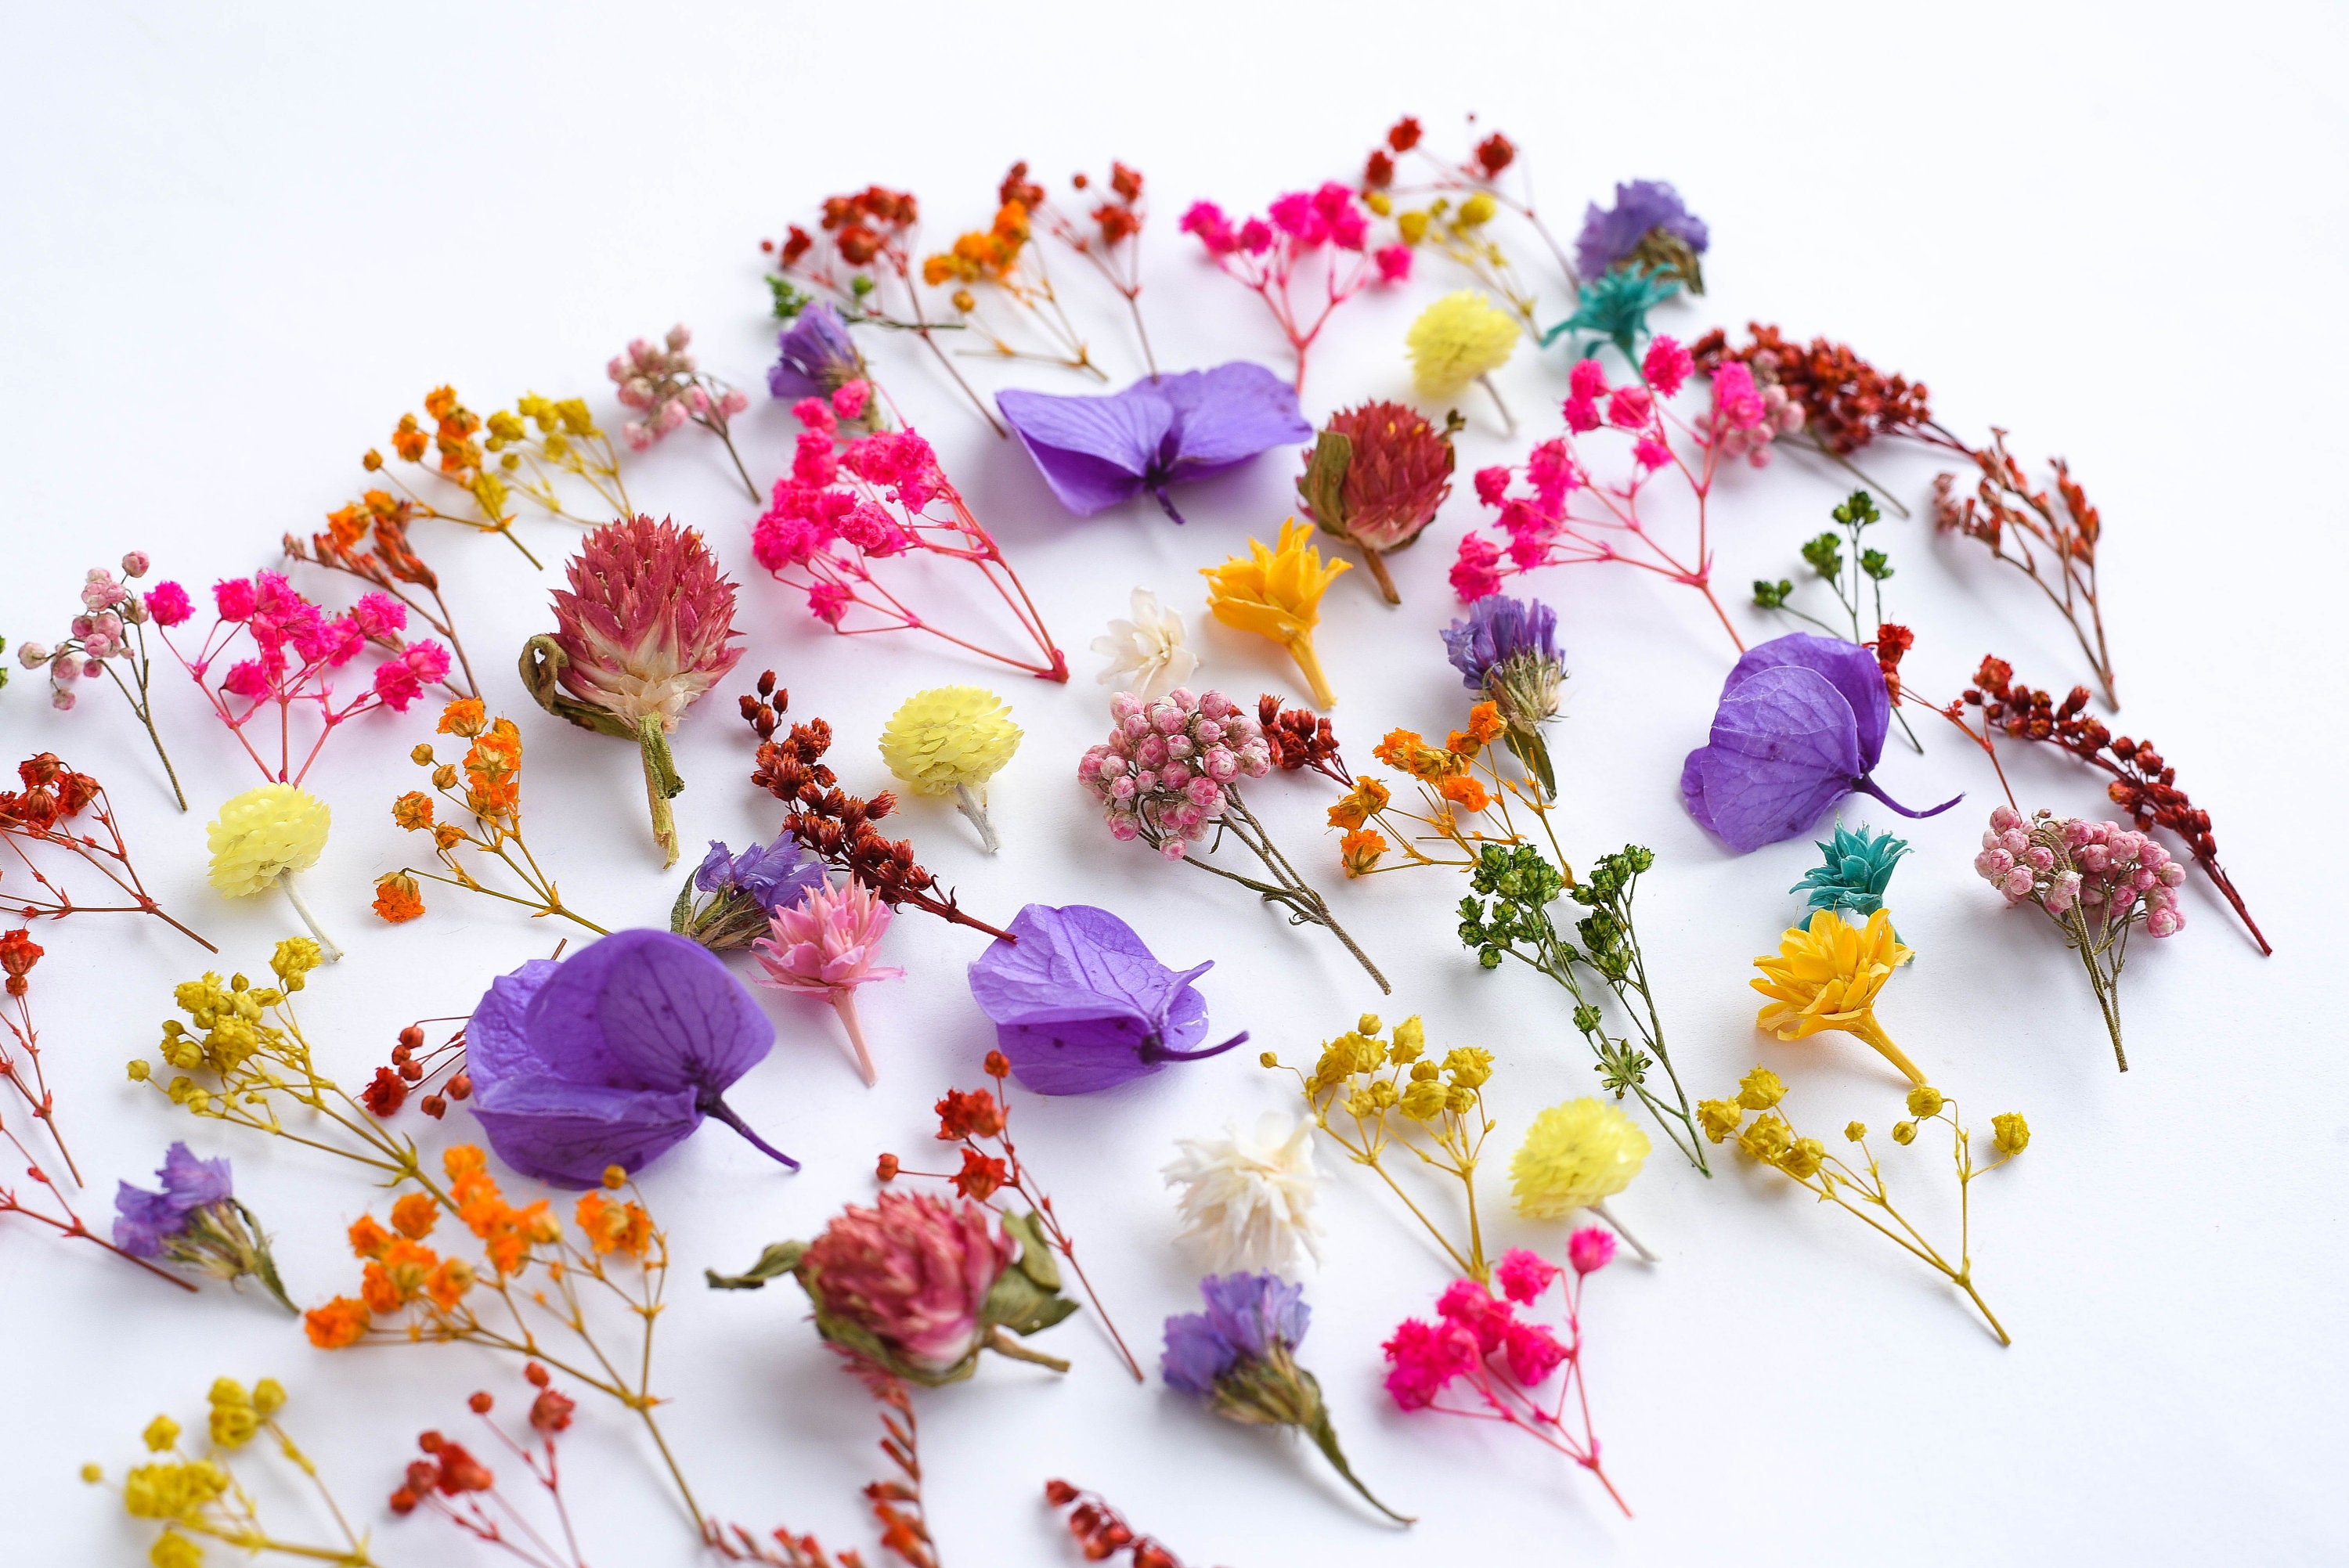 70 Pcs Tiny Flowers for Resin Jewelry, Large Set of Dried Flowers